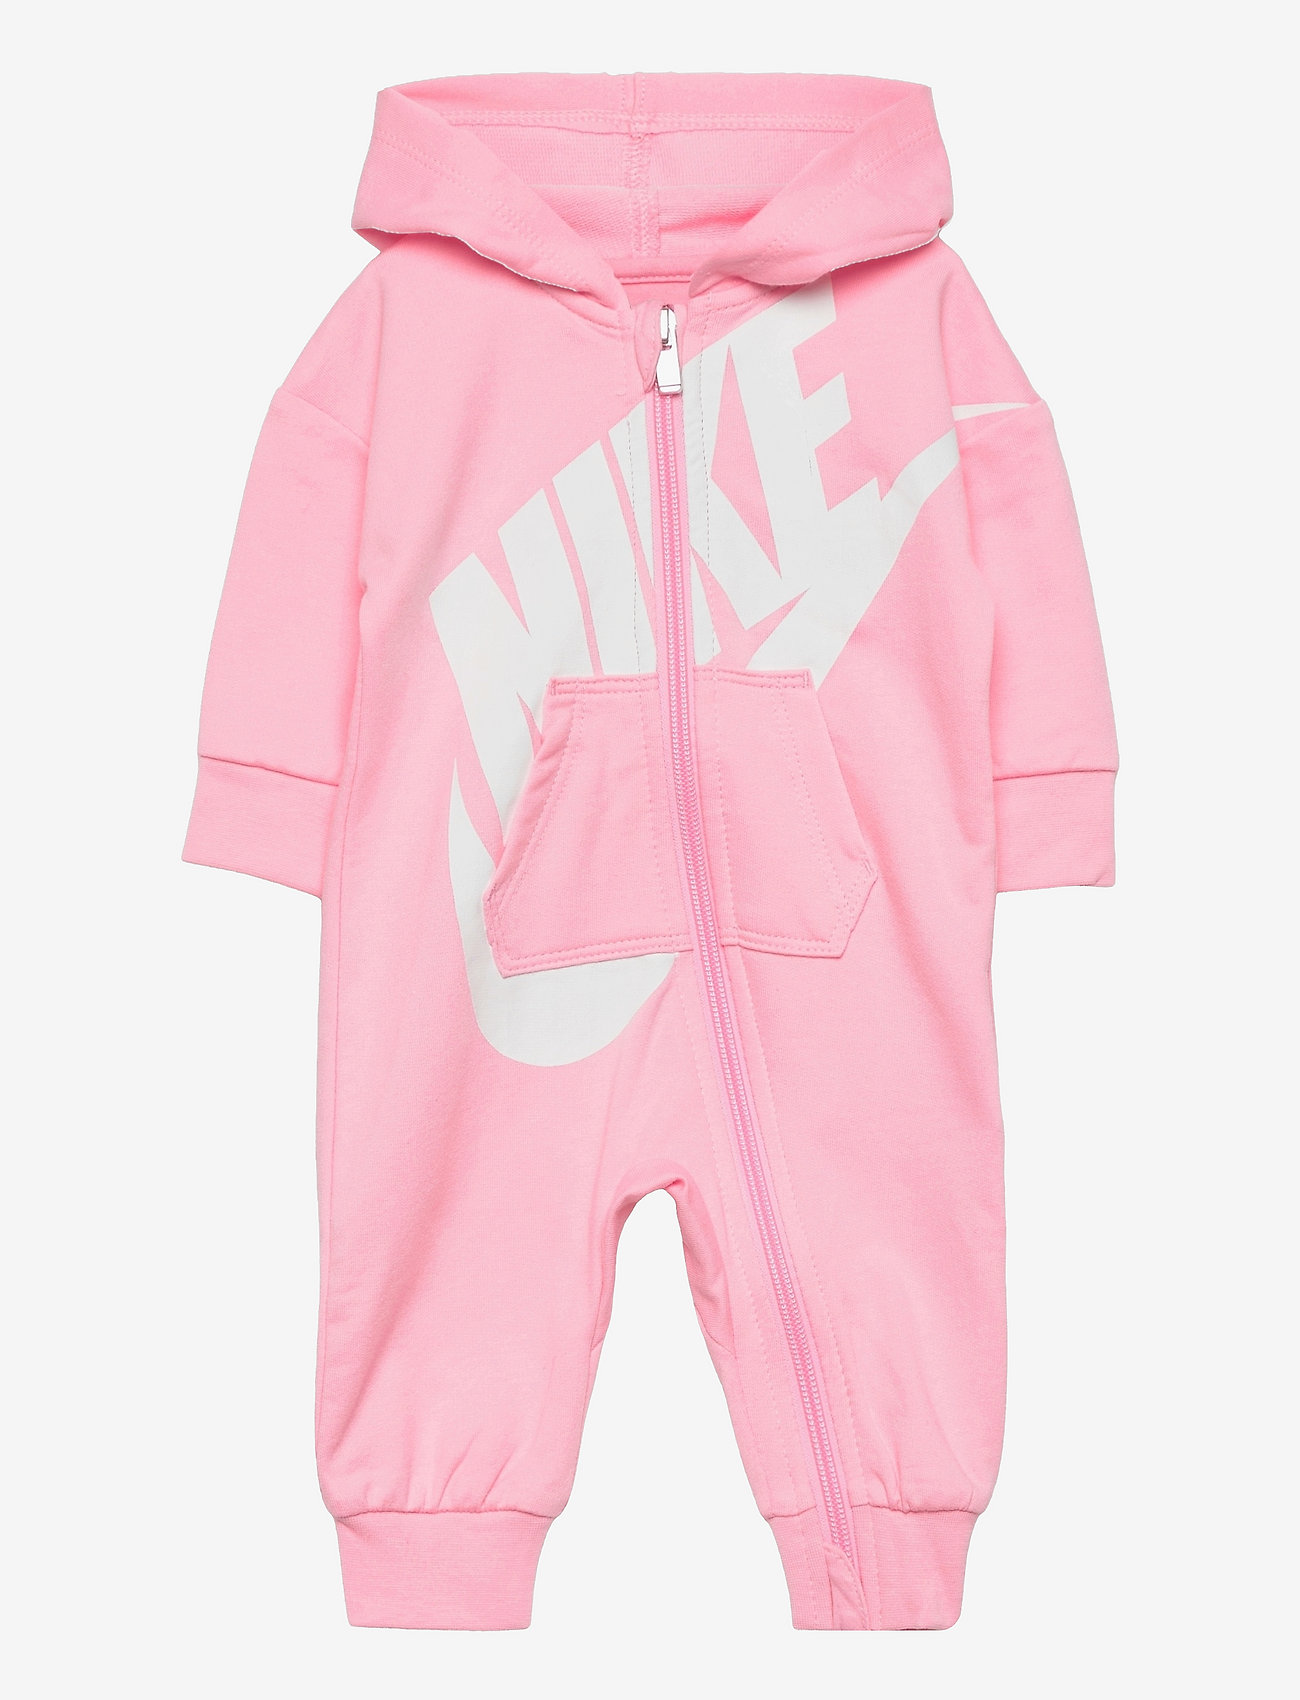 Nike - BABY FRENCH TERRY ALL DAY PLAY COVERALL / NKN ALL DAY PLAY C - long-sleeved - pink - 0